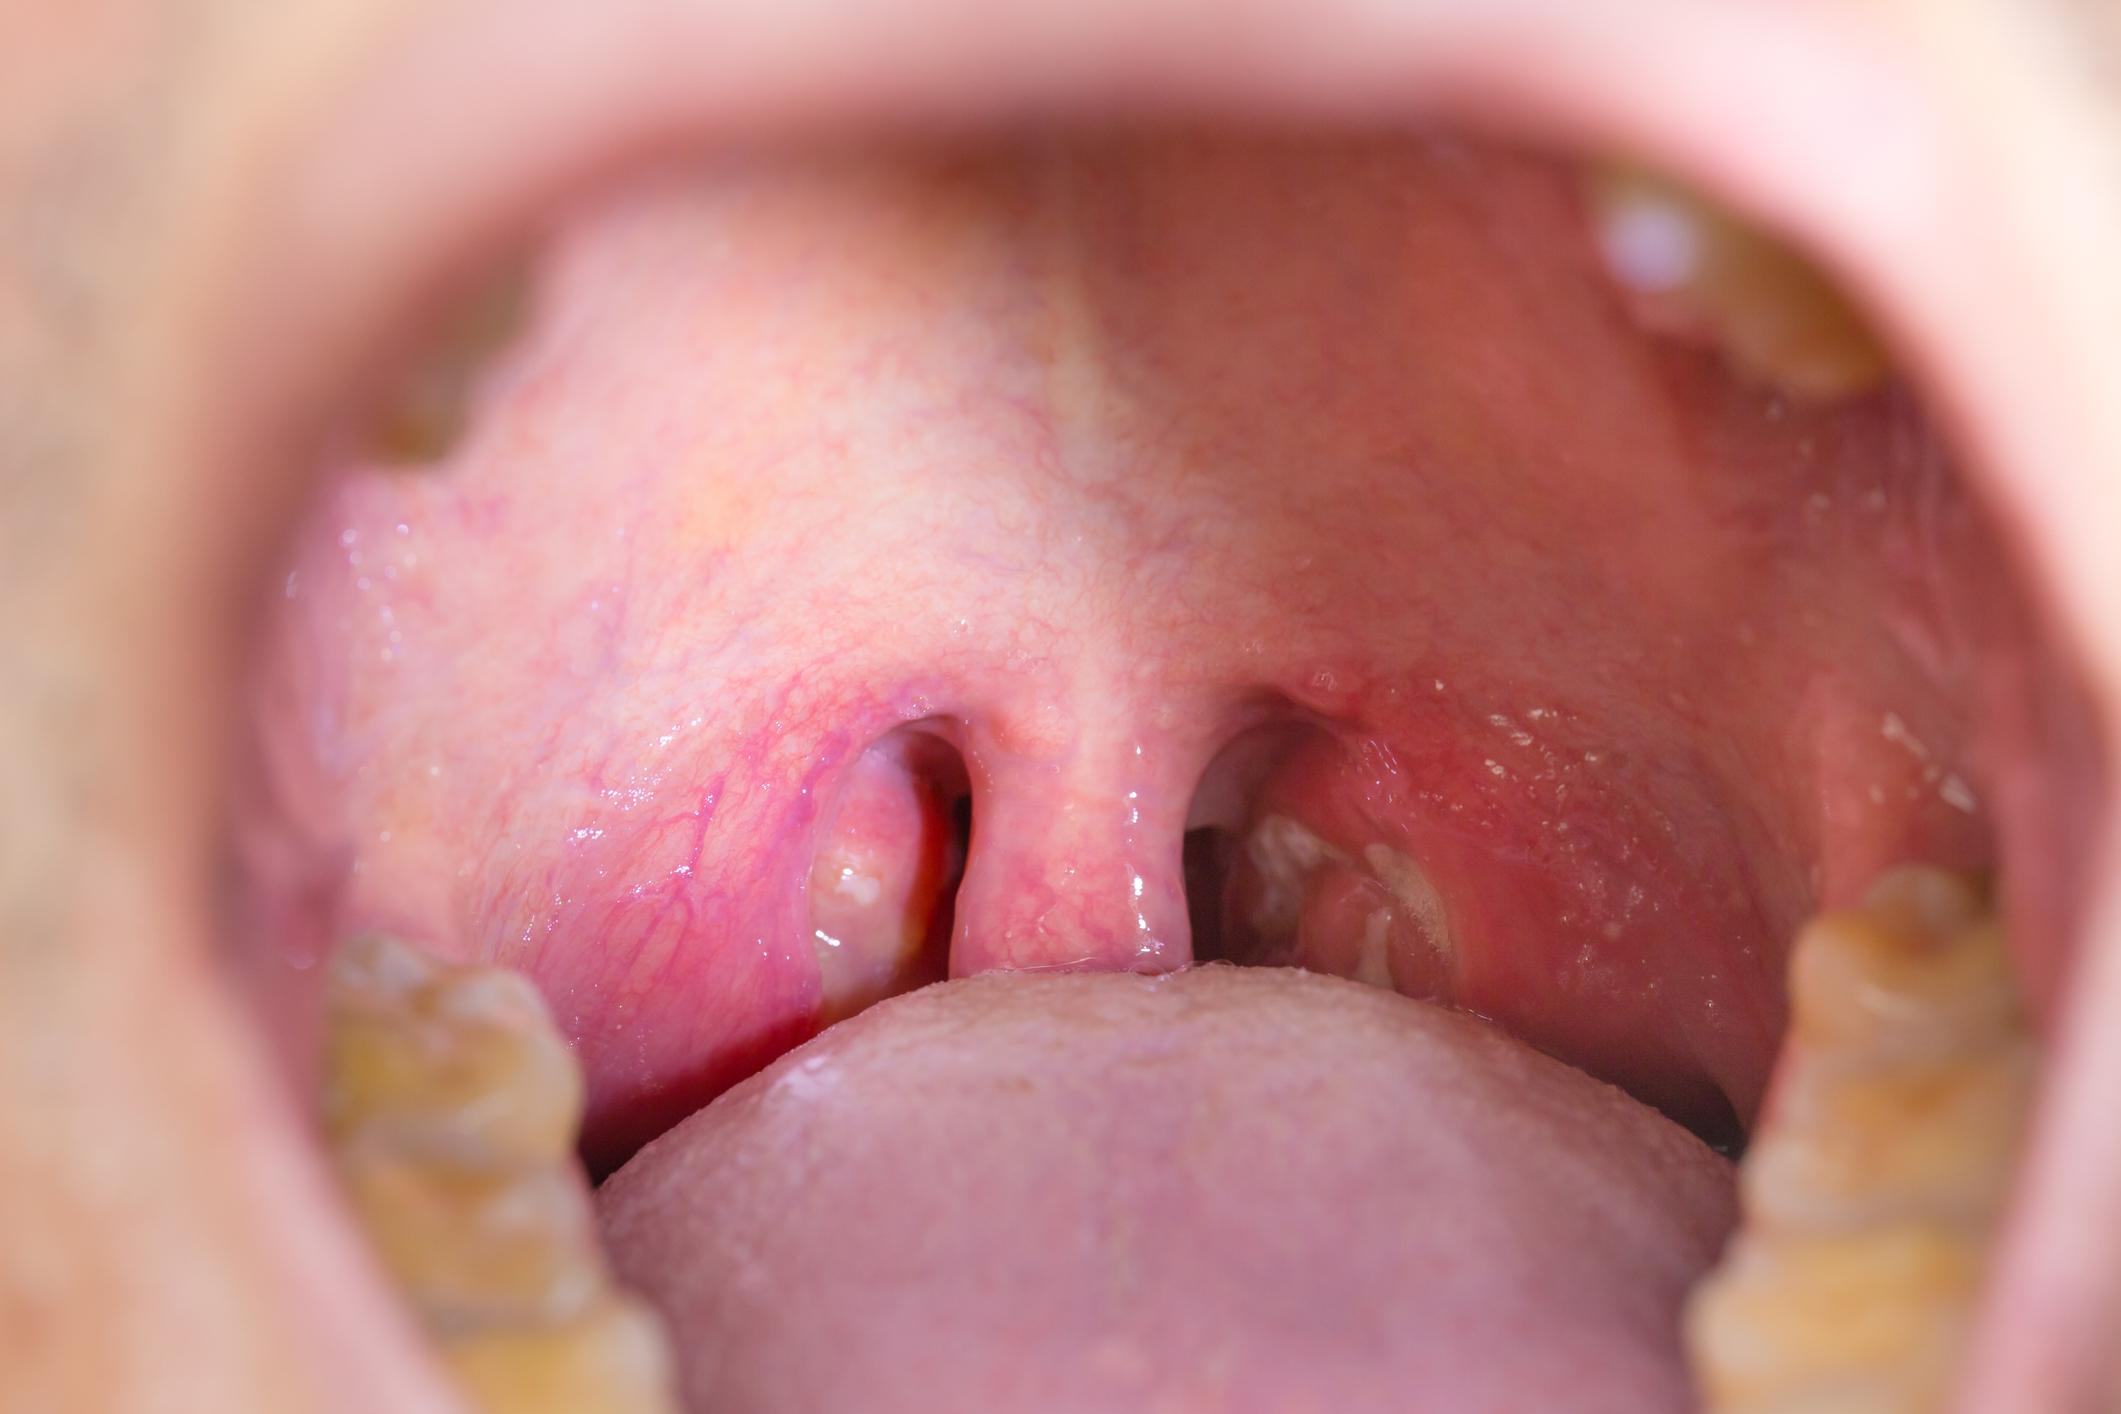 White spots on tonsils causes, s...